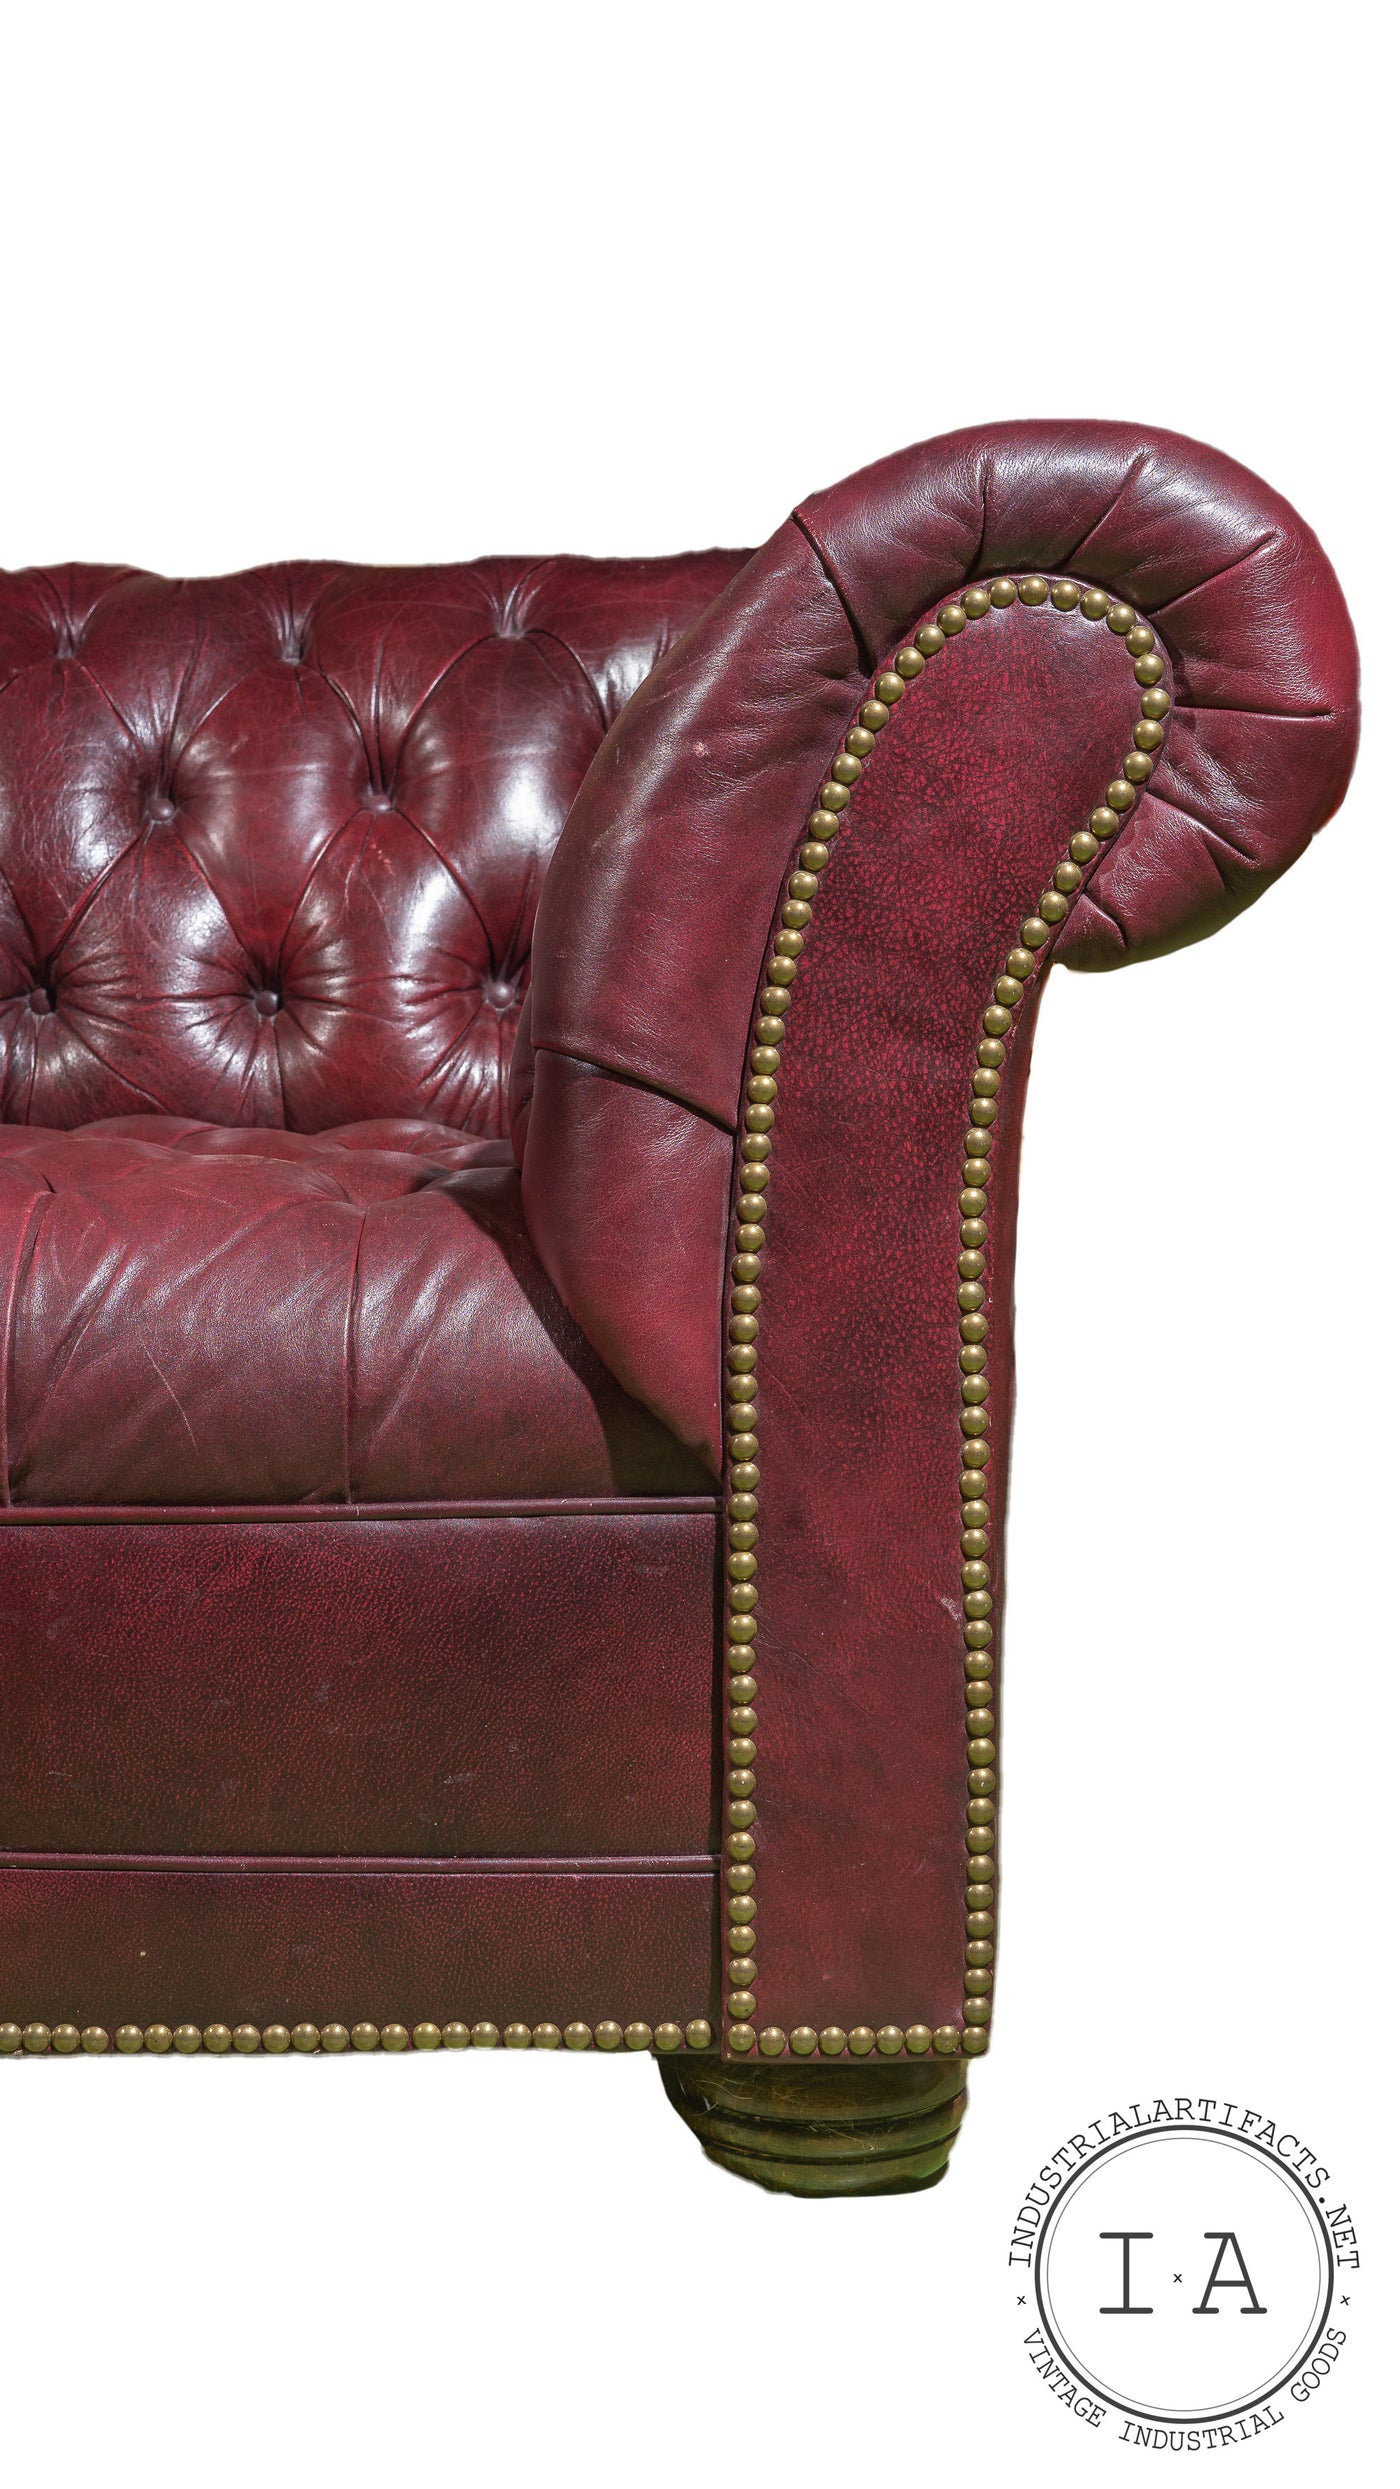 Vintage Leather Tufted Chesterfield Sofa in Oxblood